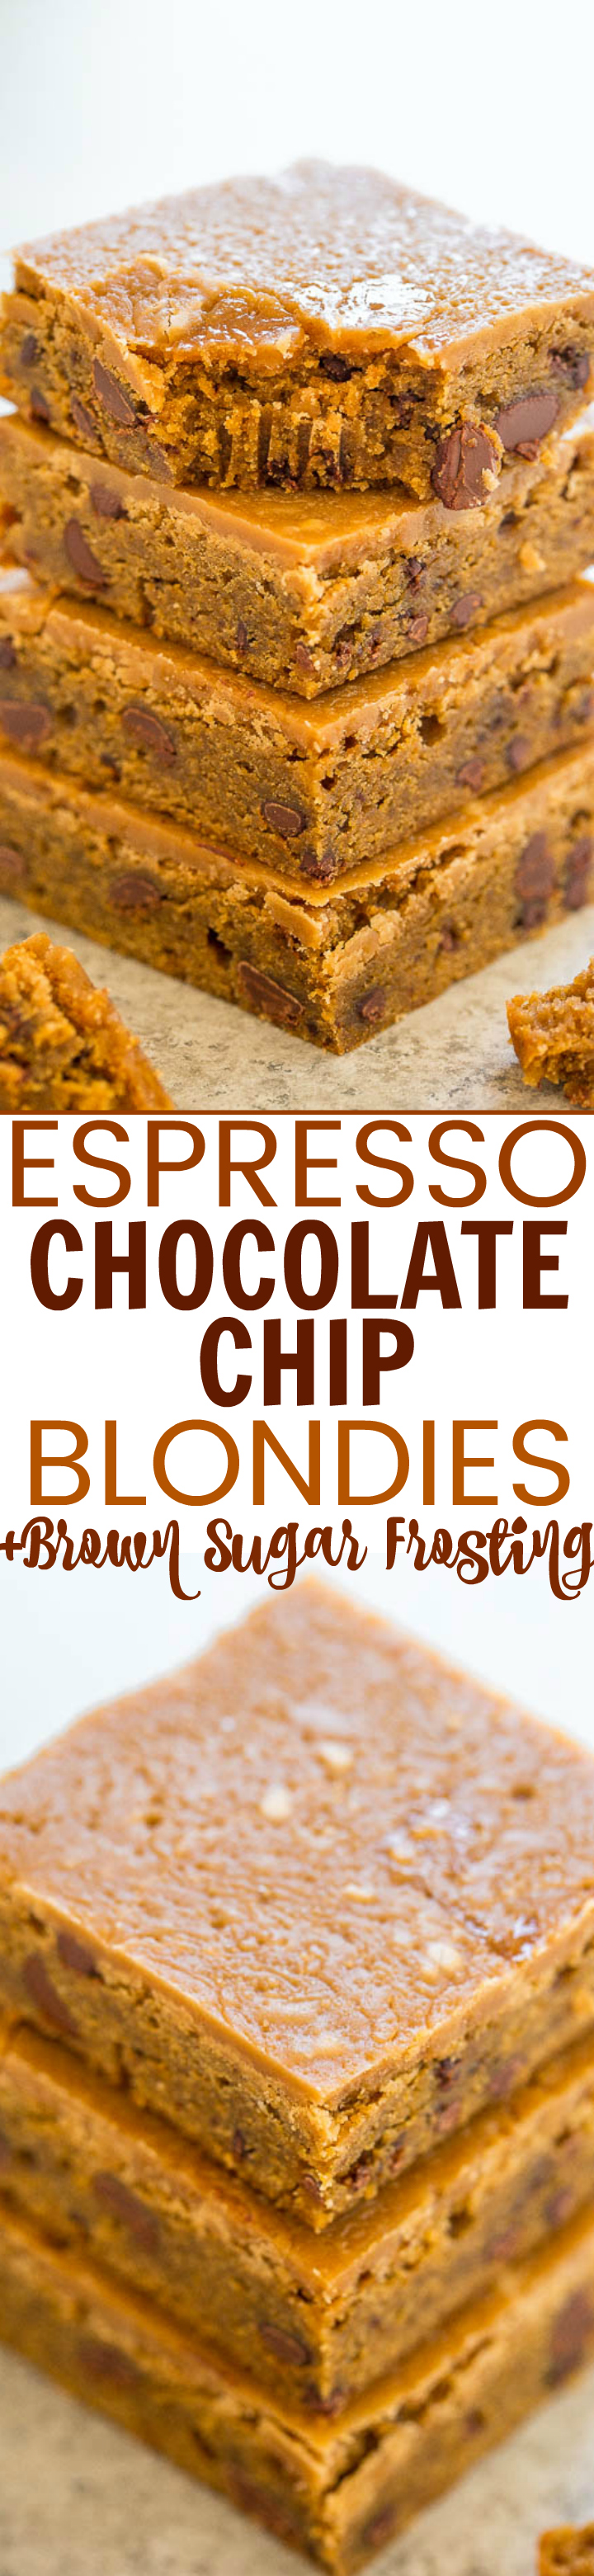 Espresso Chocolate Chip Blondies with Brown Sugar Frosting - EASY, chewy, super SOFT blondies infused with espresso and chocolate!! ENJOY your espresso in dessert form from now on! The brown sugar frosting is simply AMAZING!!